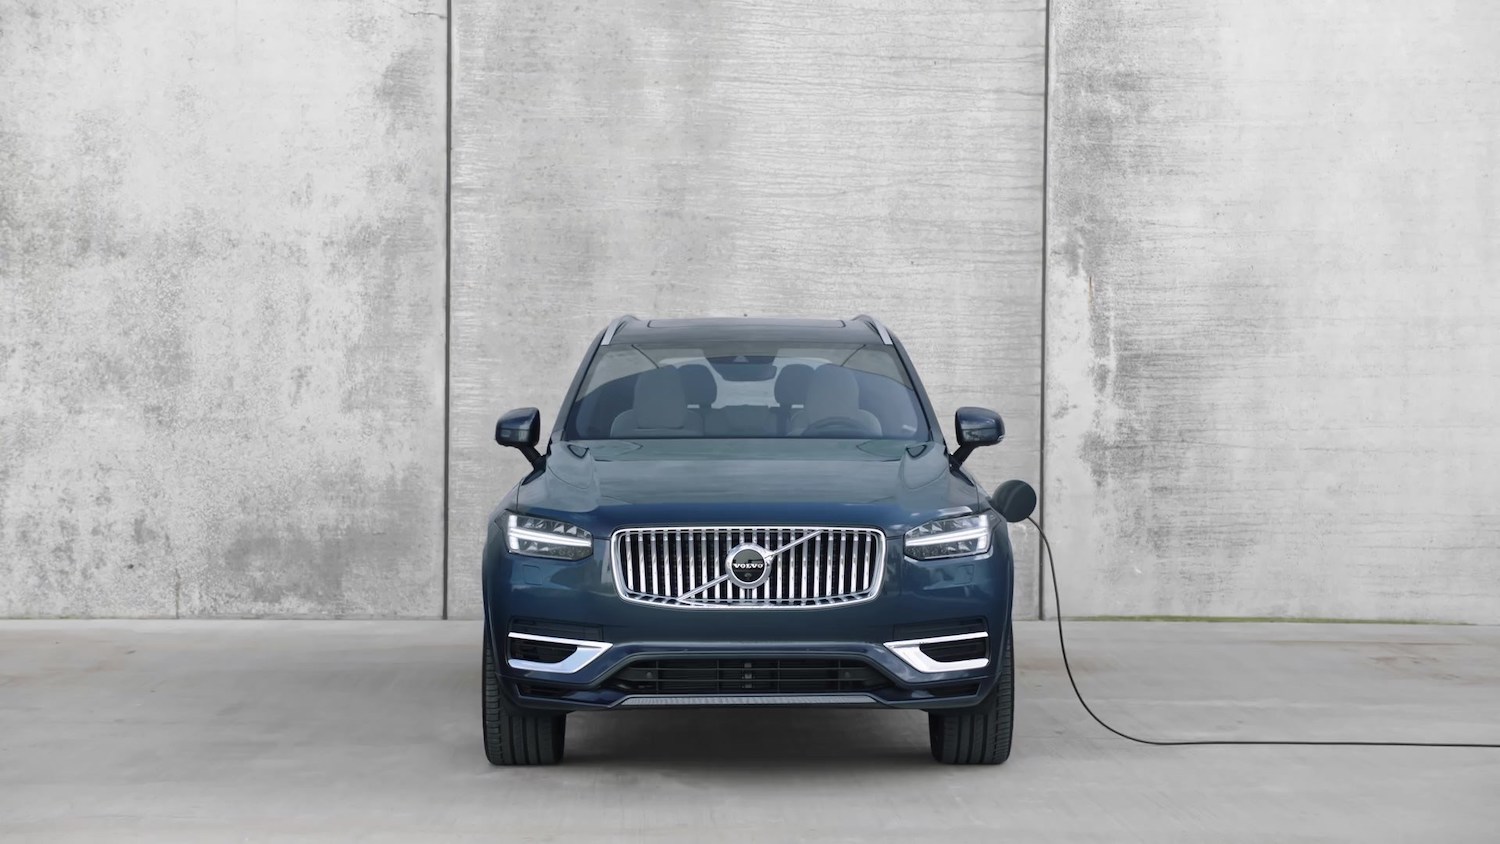 Volvo plug-in hybrid crossover SUV parked in front of a concrete wall, a charging cable attached.